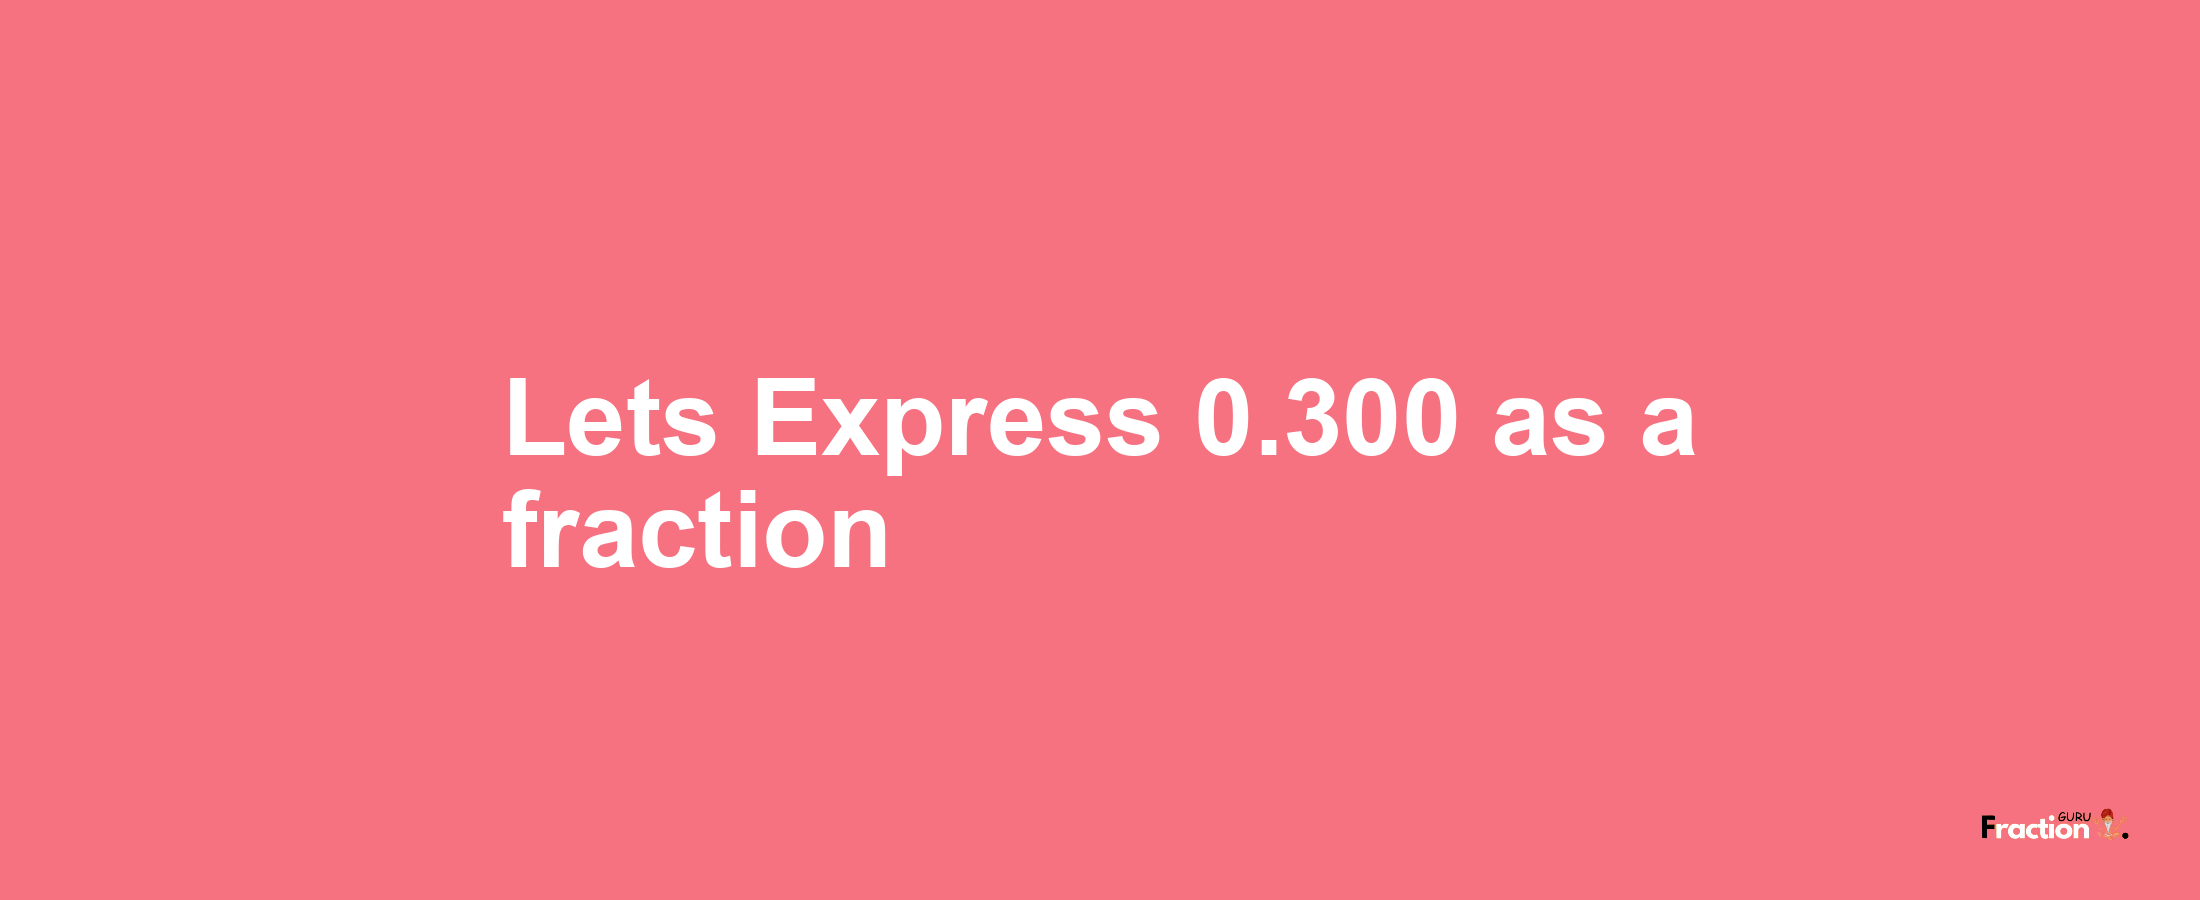 Lets Express 0.300 as afraction